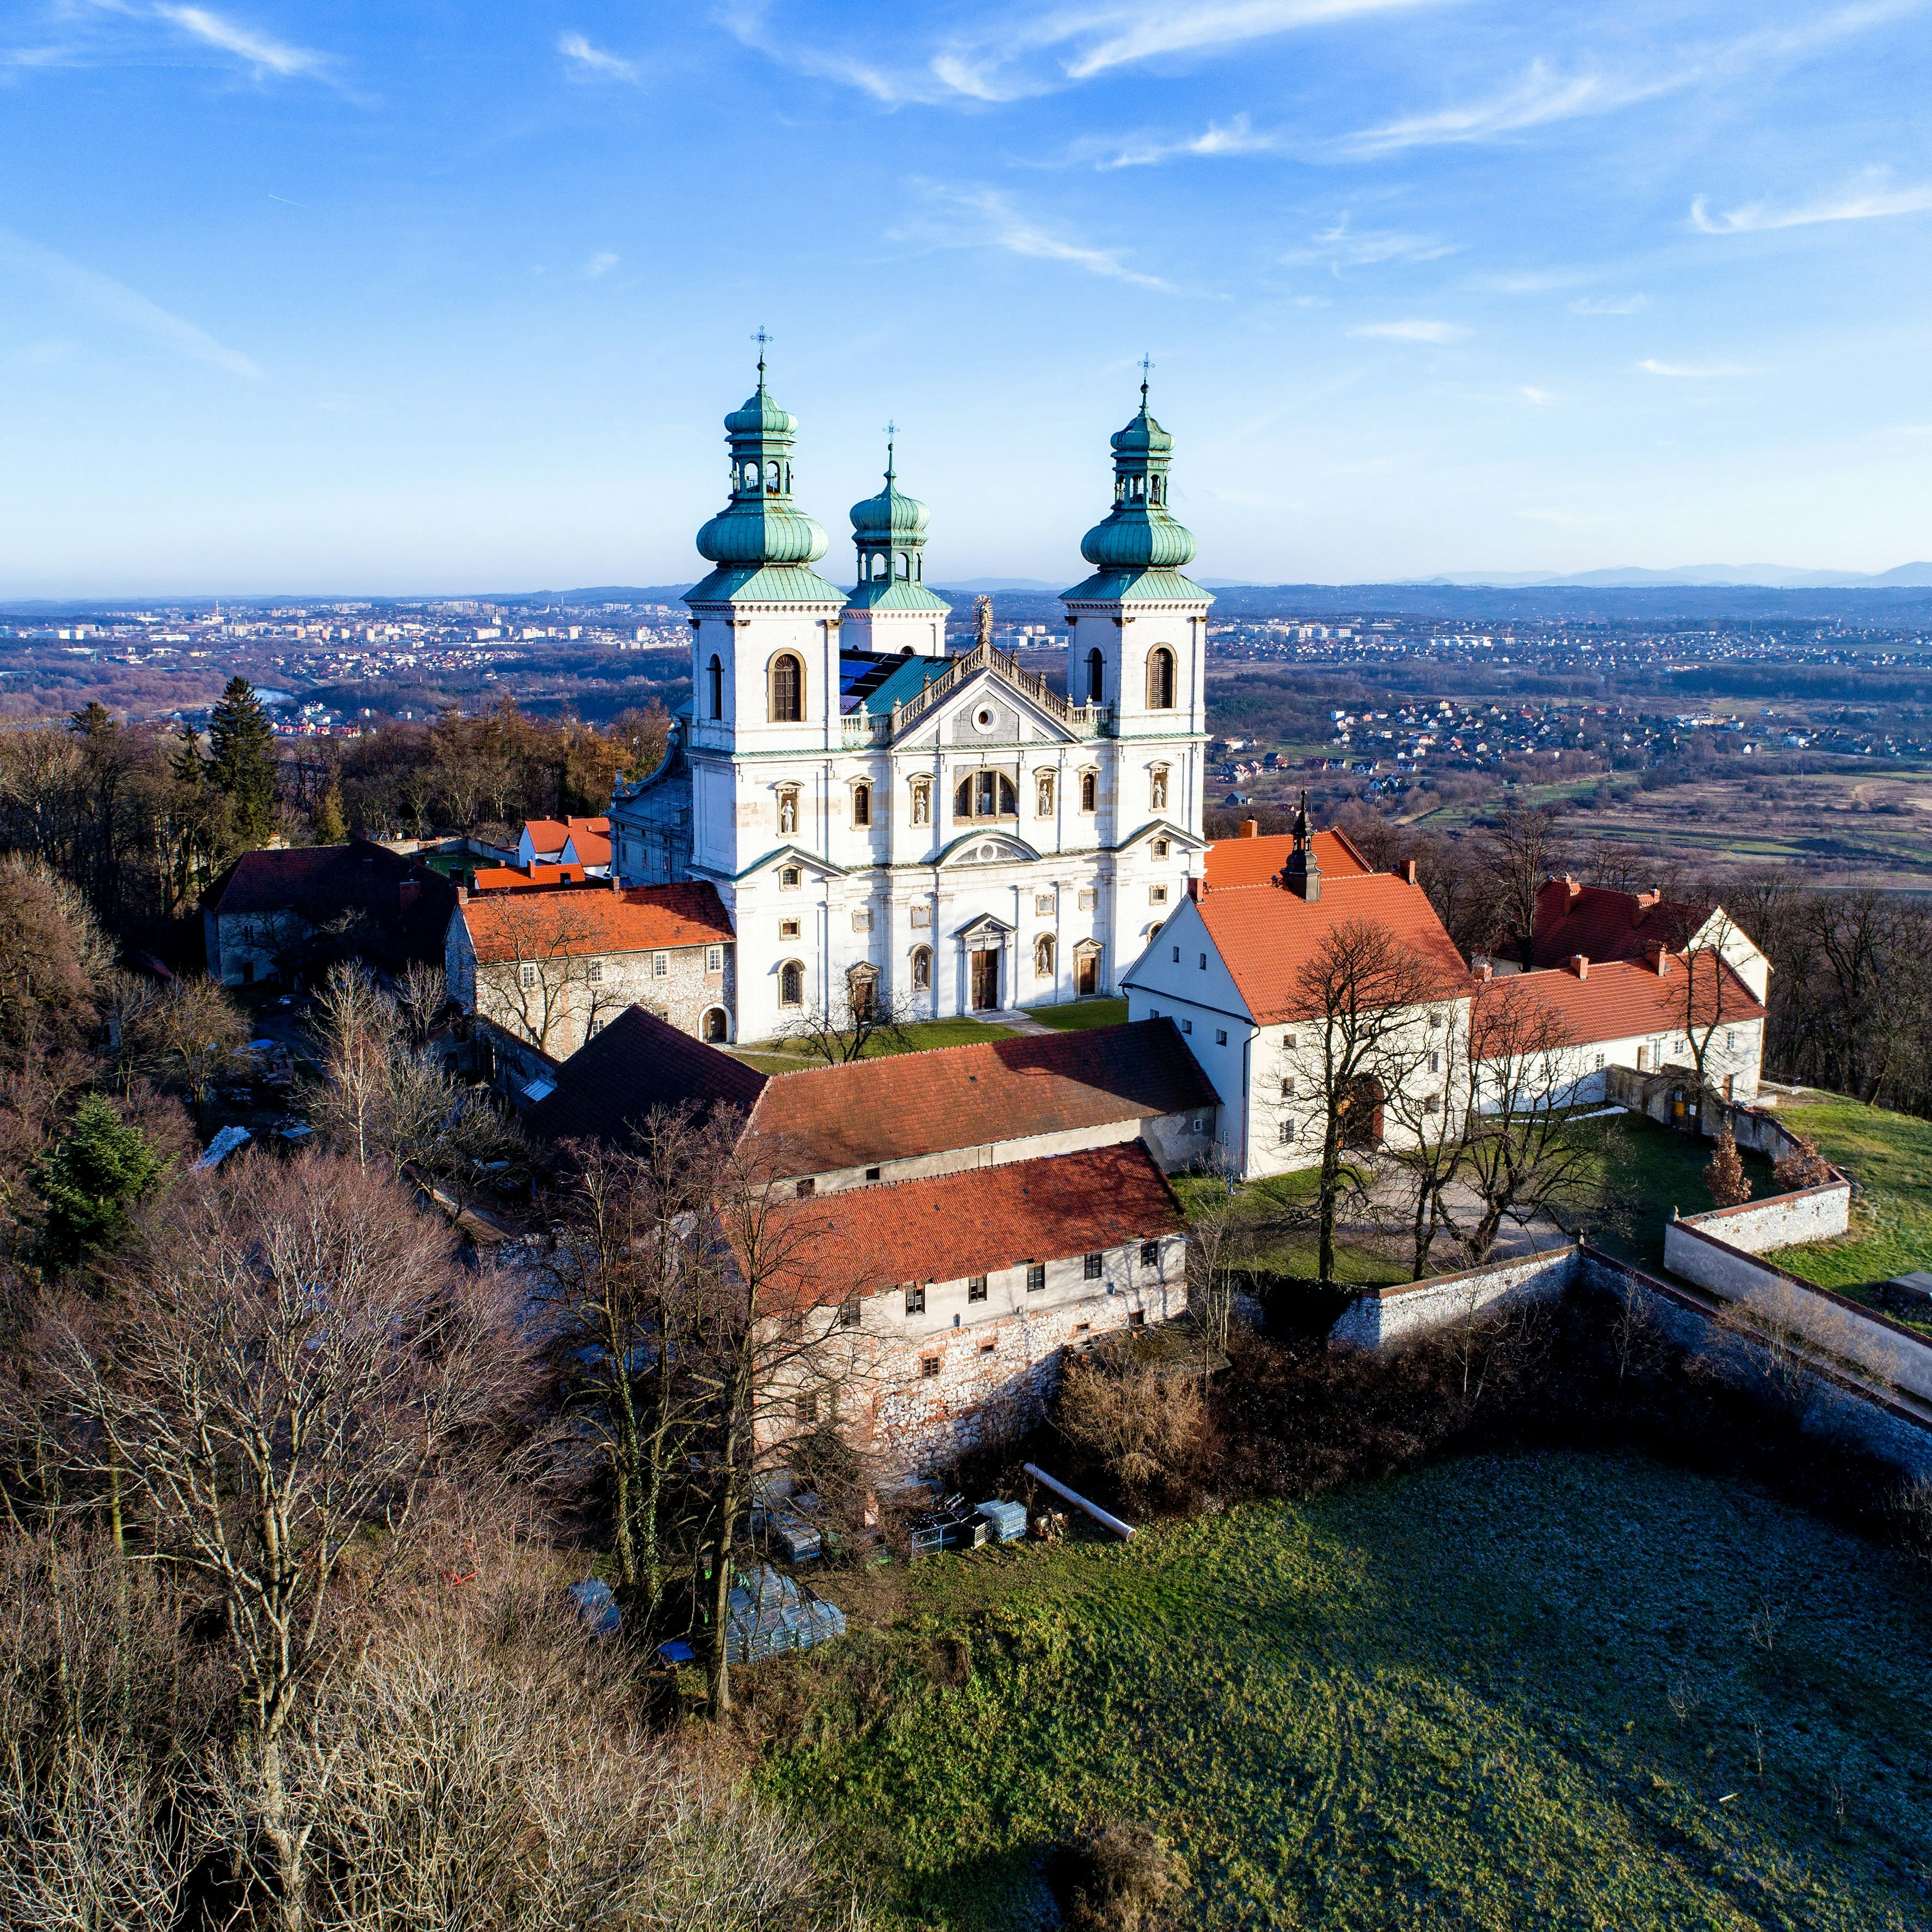 Camaldolese monastery and baroque church in the wood on the hill in Bielany, Krakow, Poland , Aerial view in winter with Vistula River and far view of Cracow city in the background